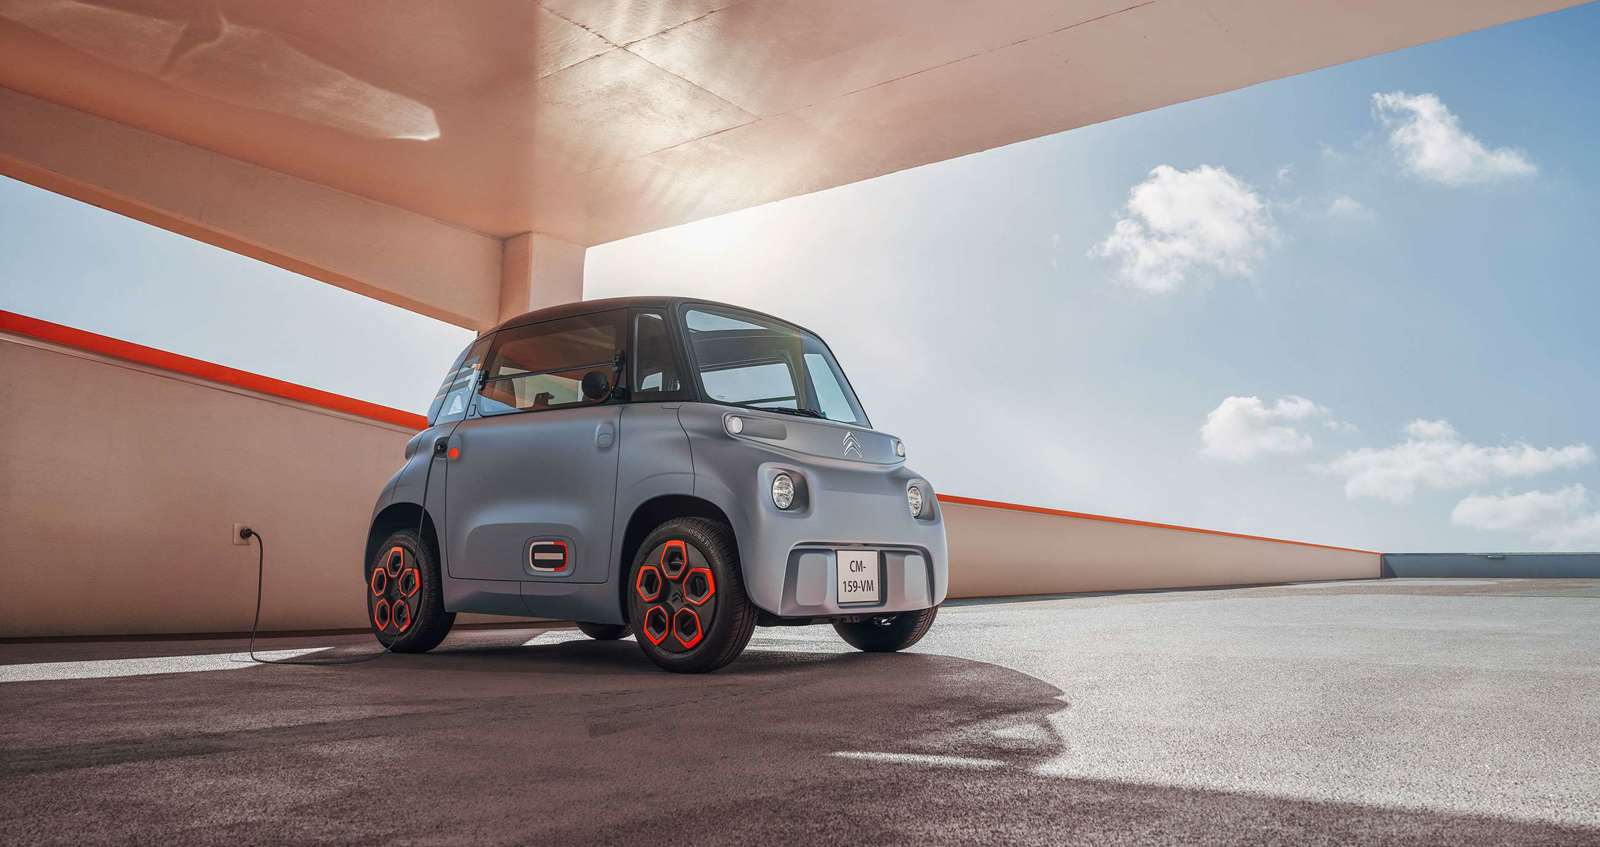 The Citroën Ami is a brilliant little micro-car we'll never get in